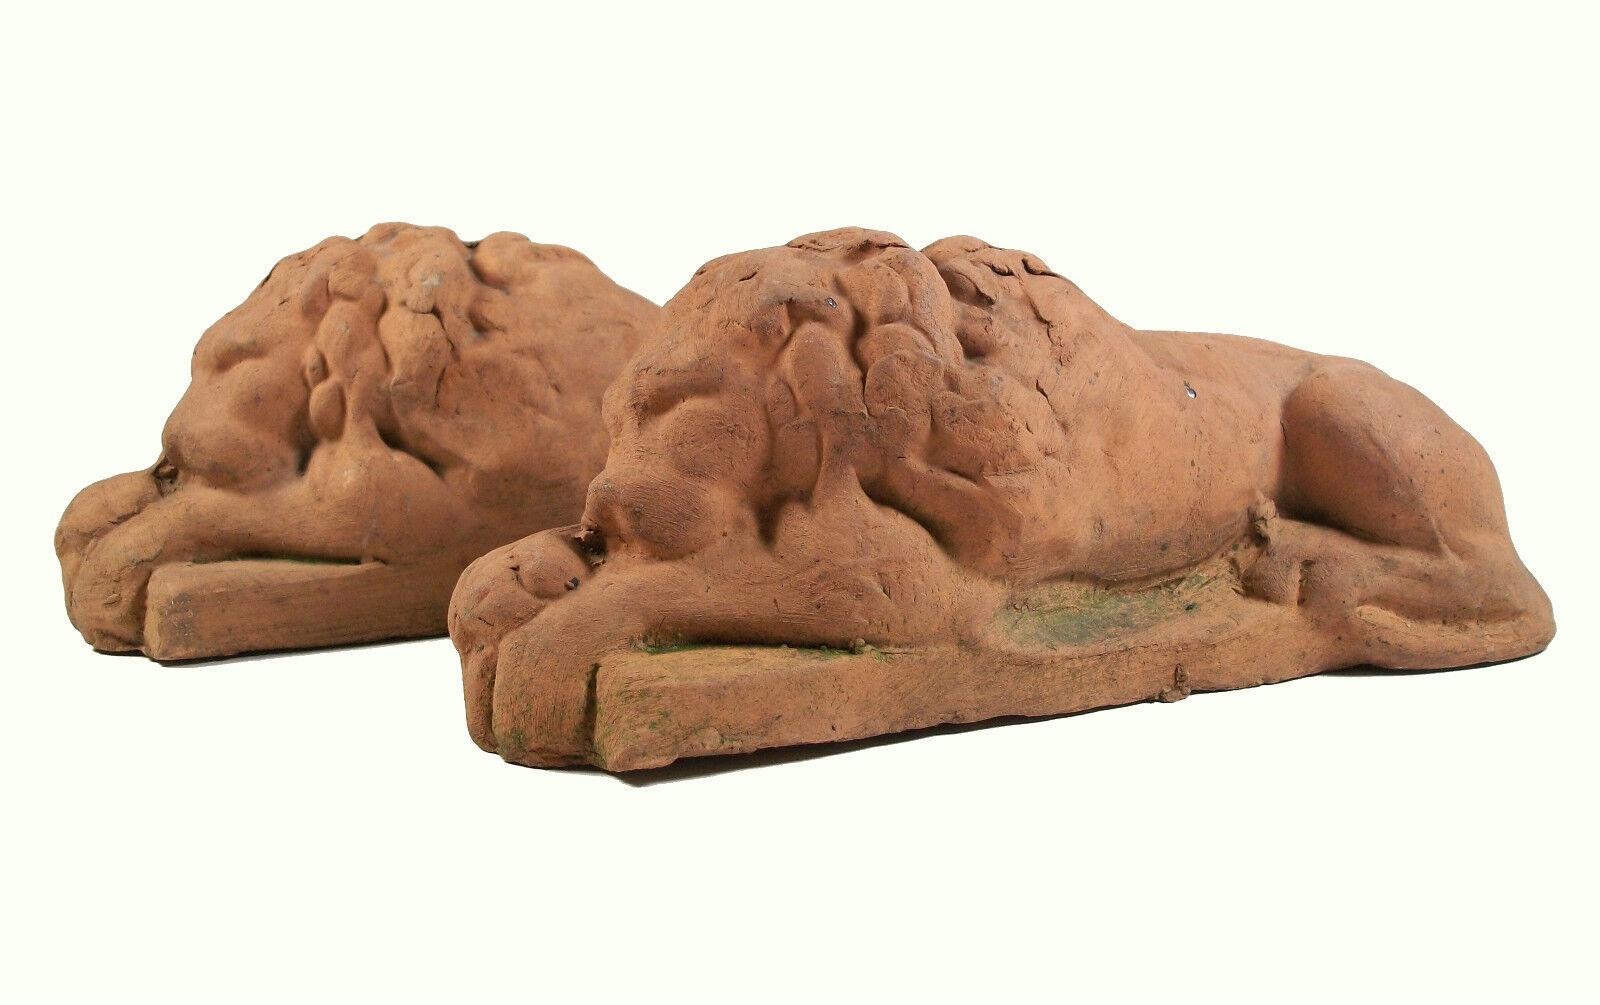 Antique pair of Neoclassical style terracotta recumbent lions - unsigned - Continental - late 19th/early 20th century.

The over-all condition of this pair of pre-owned antique items is excellent - no loss - no damage - no repairs - surface grime